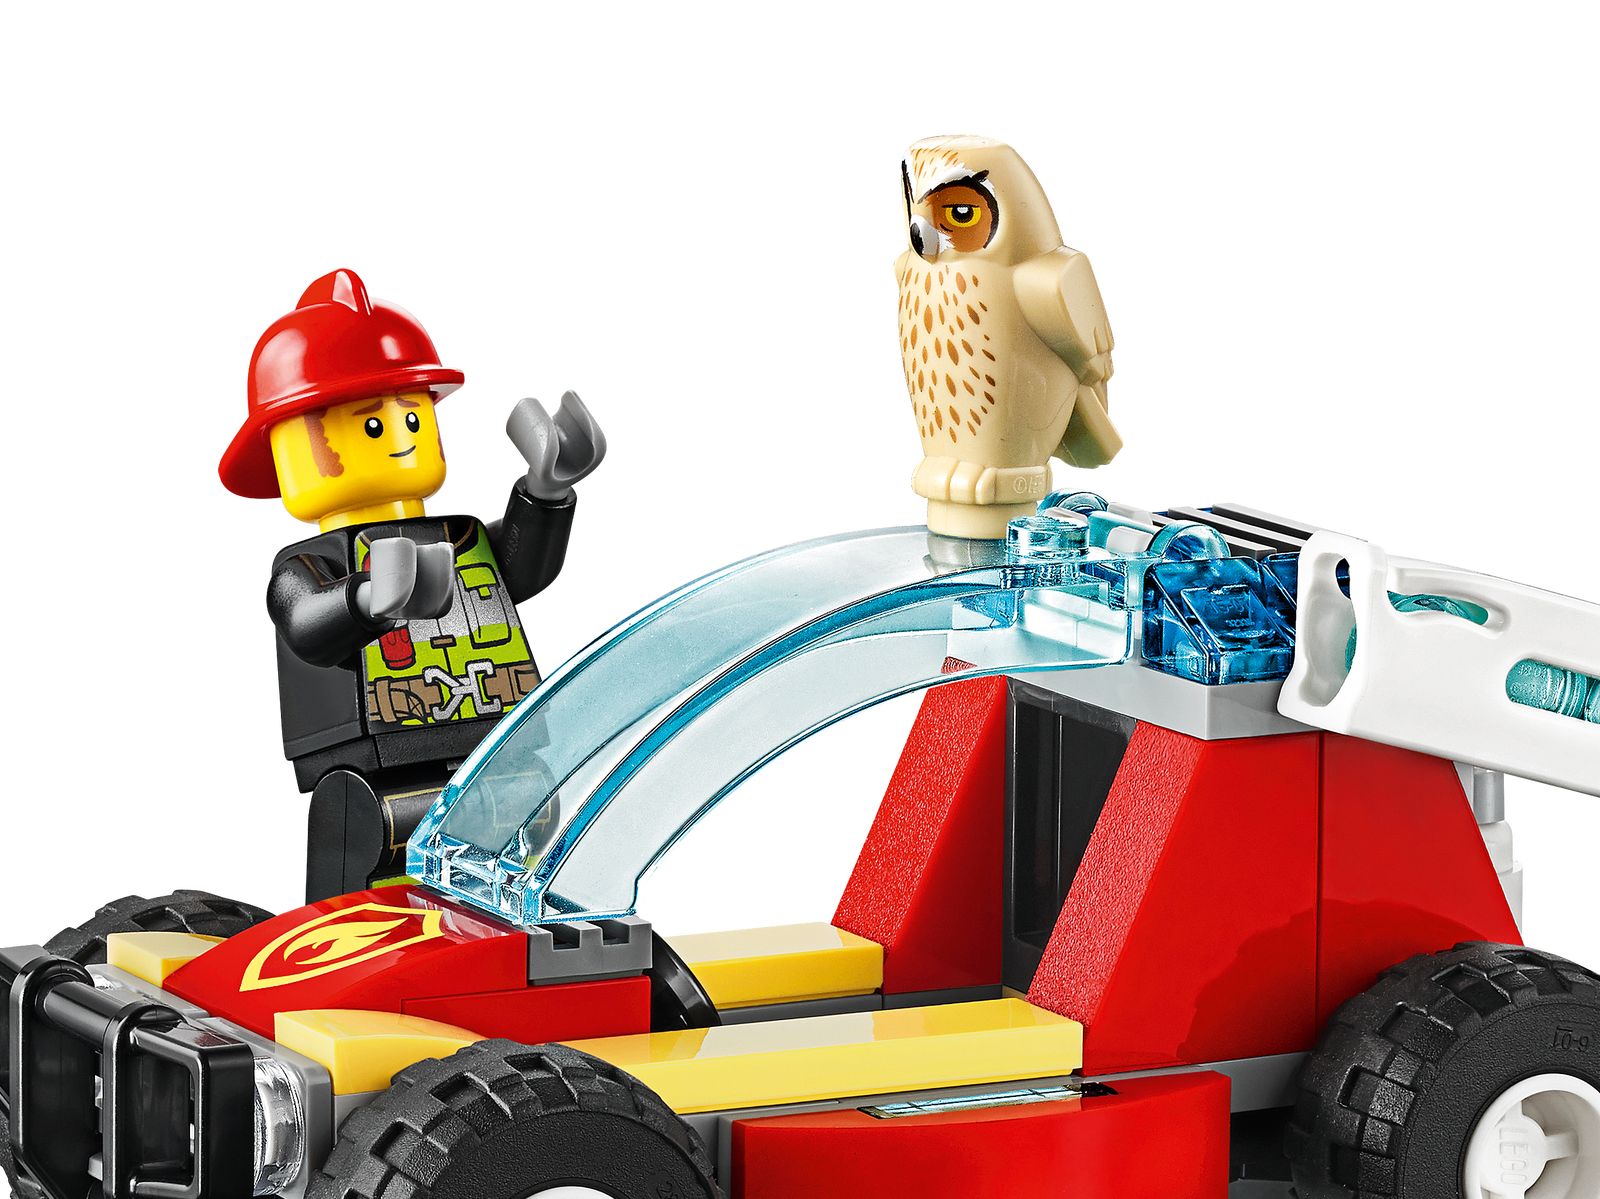 Lego City Forest Fire 60247